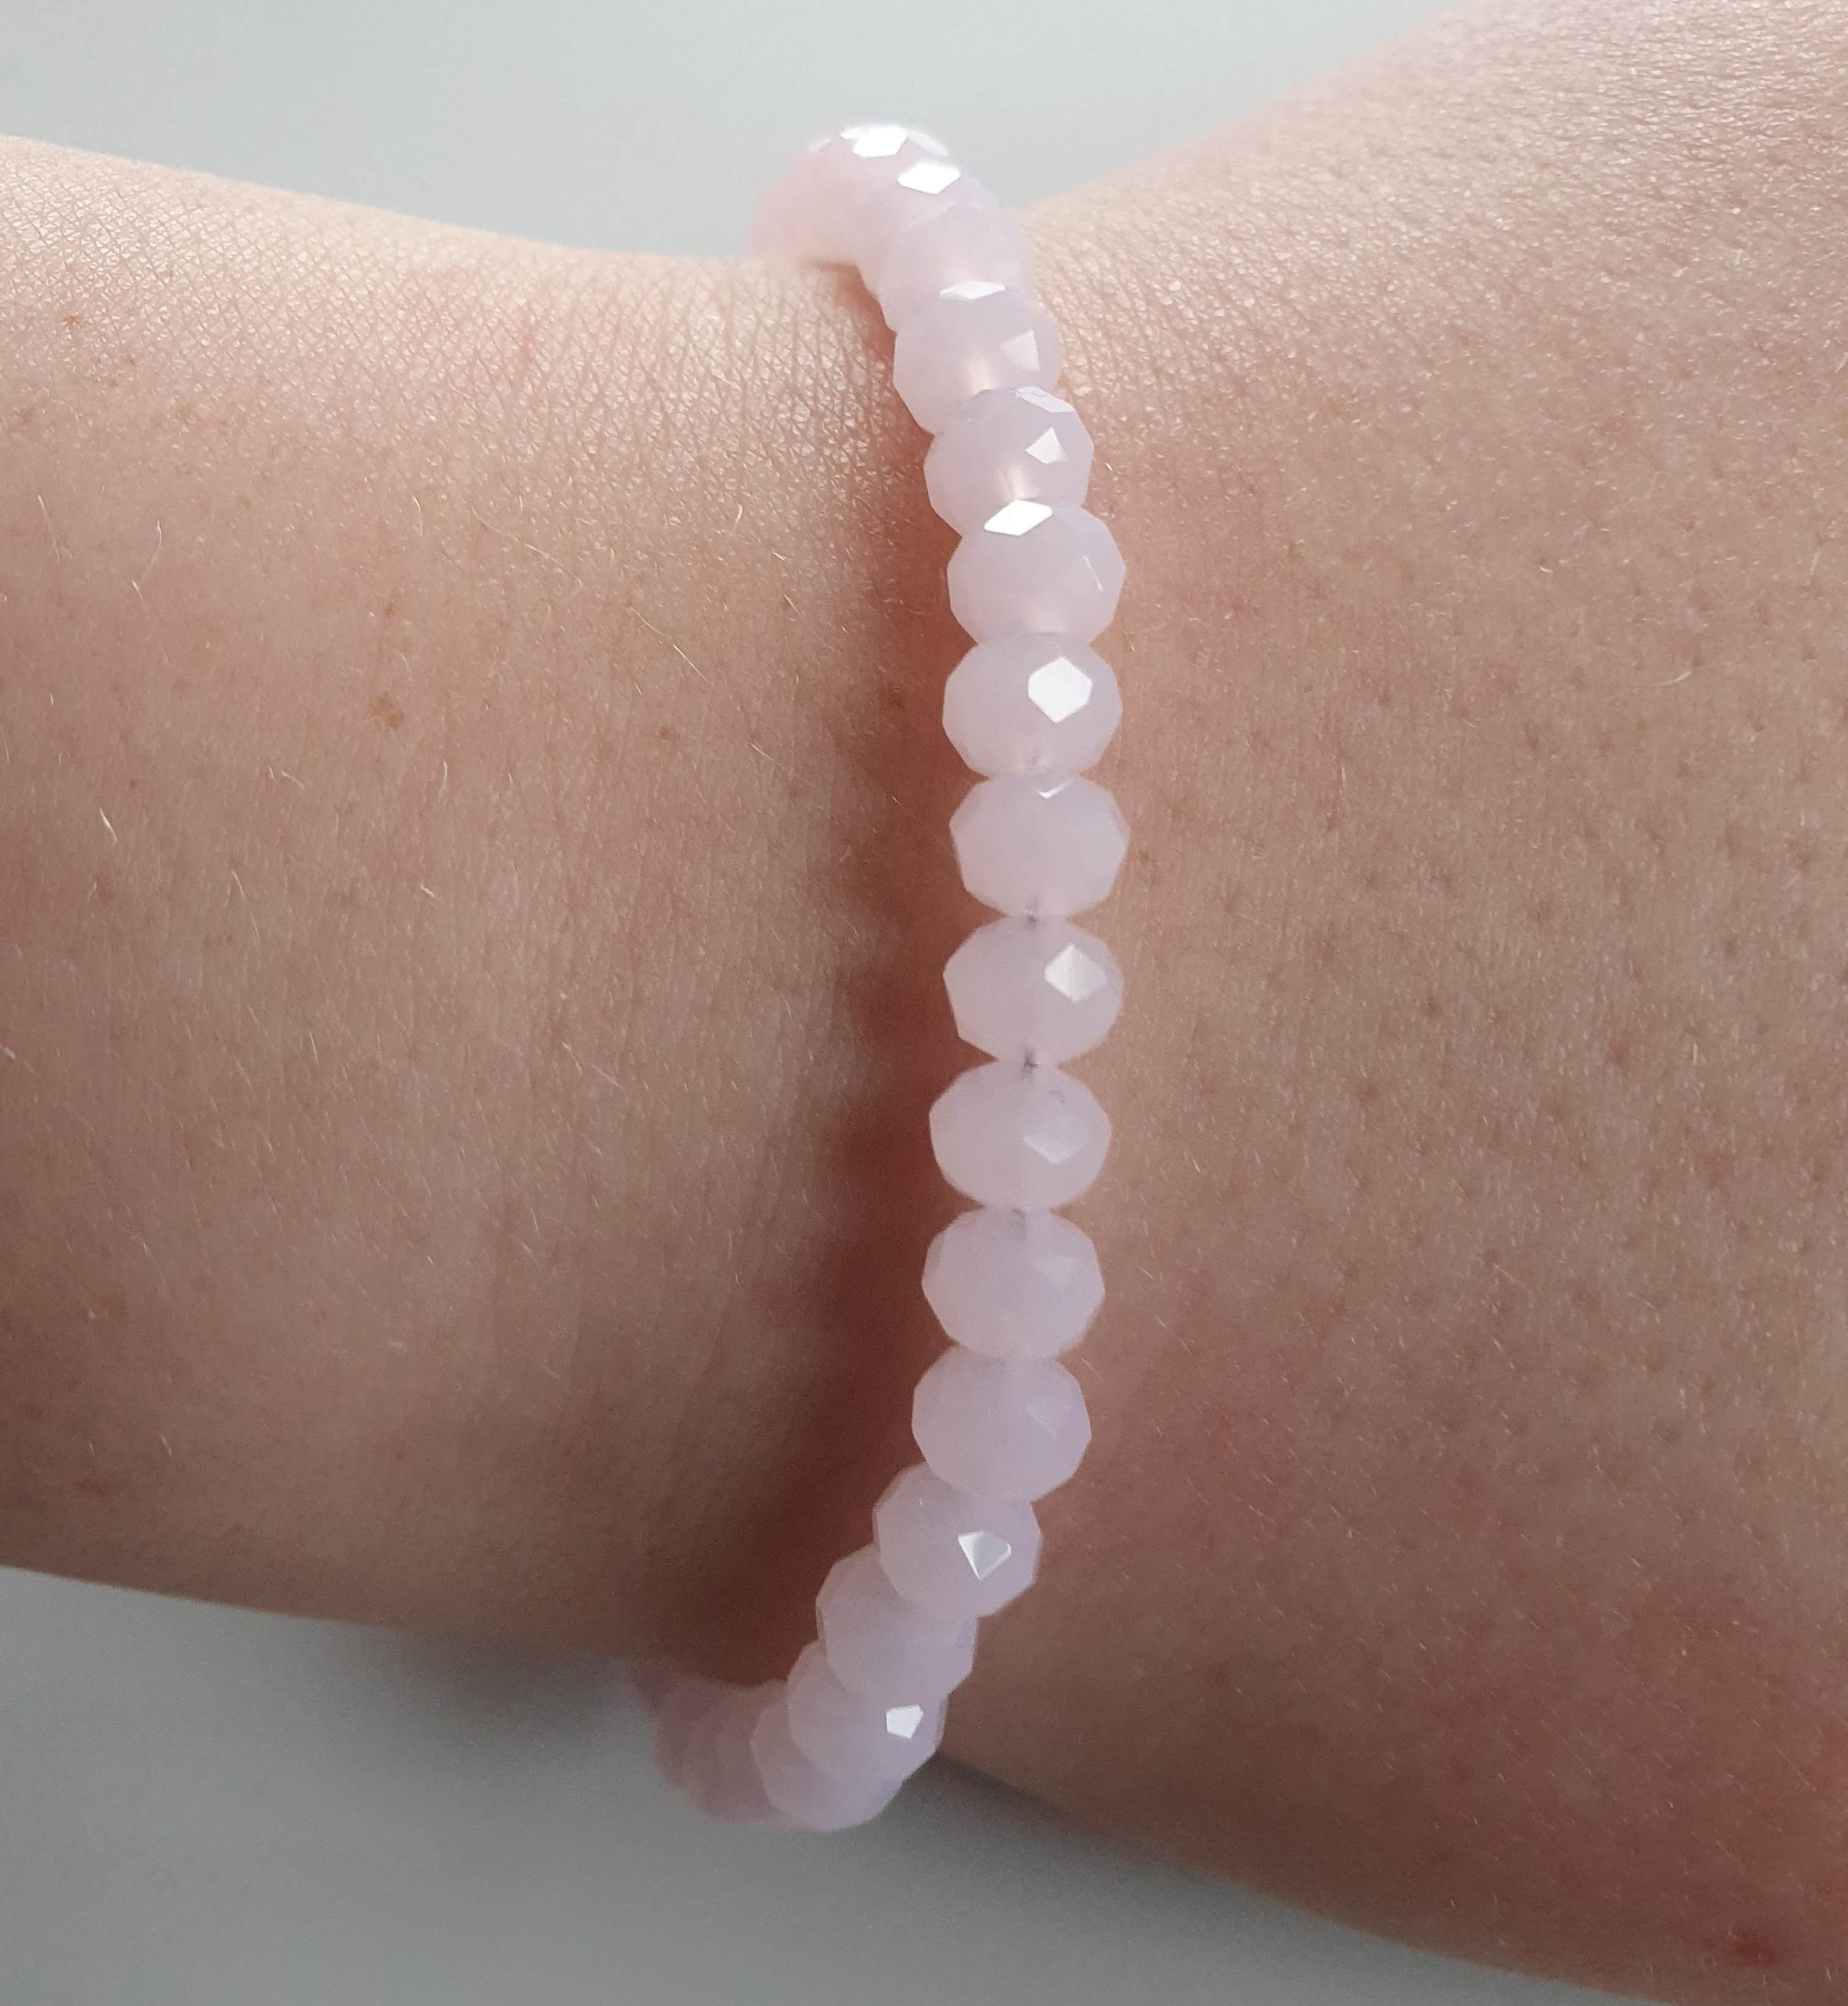 This is a picture of a baby pink bracelet on a wrist